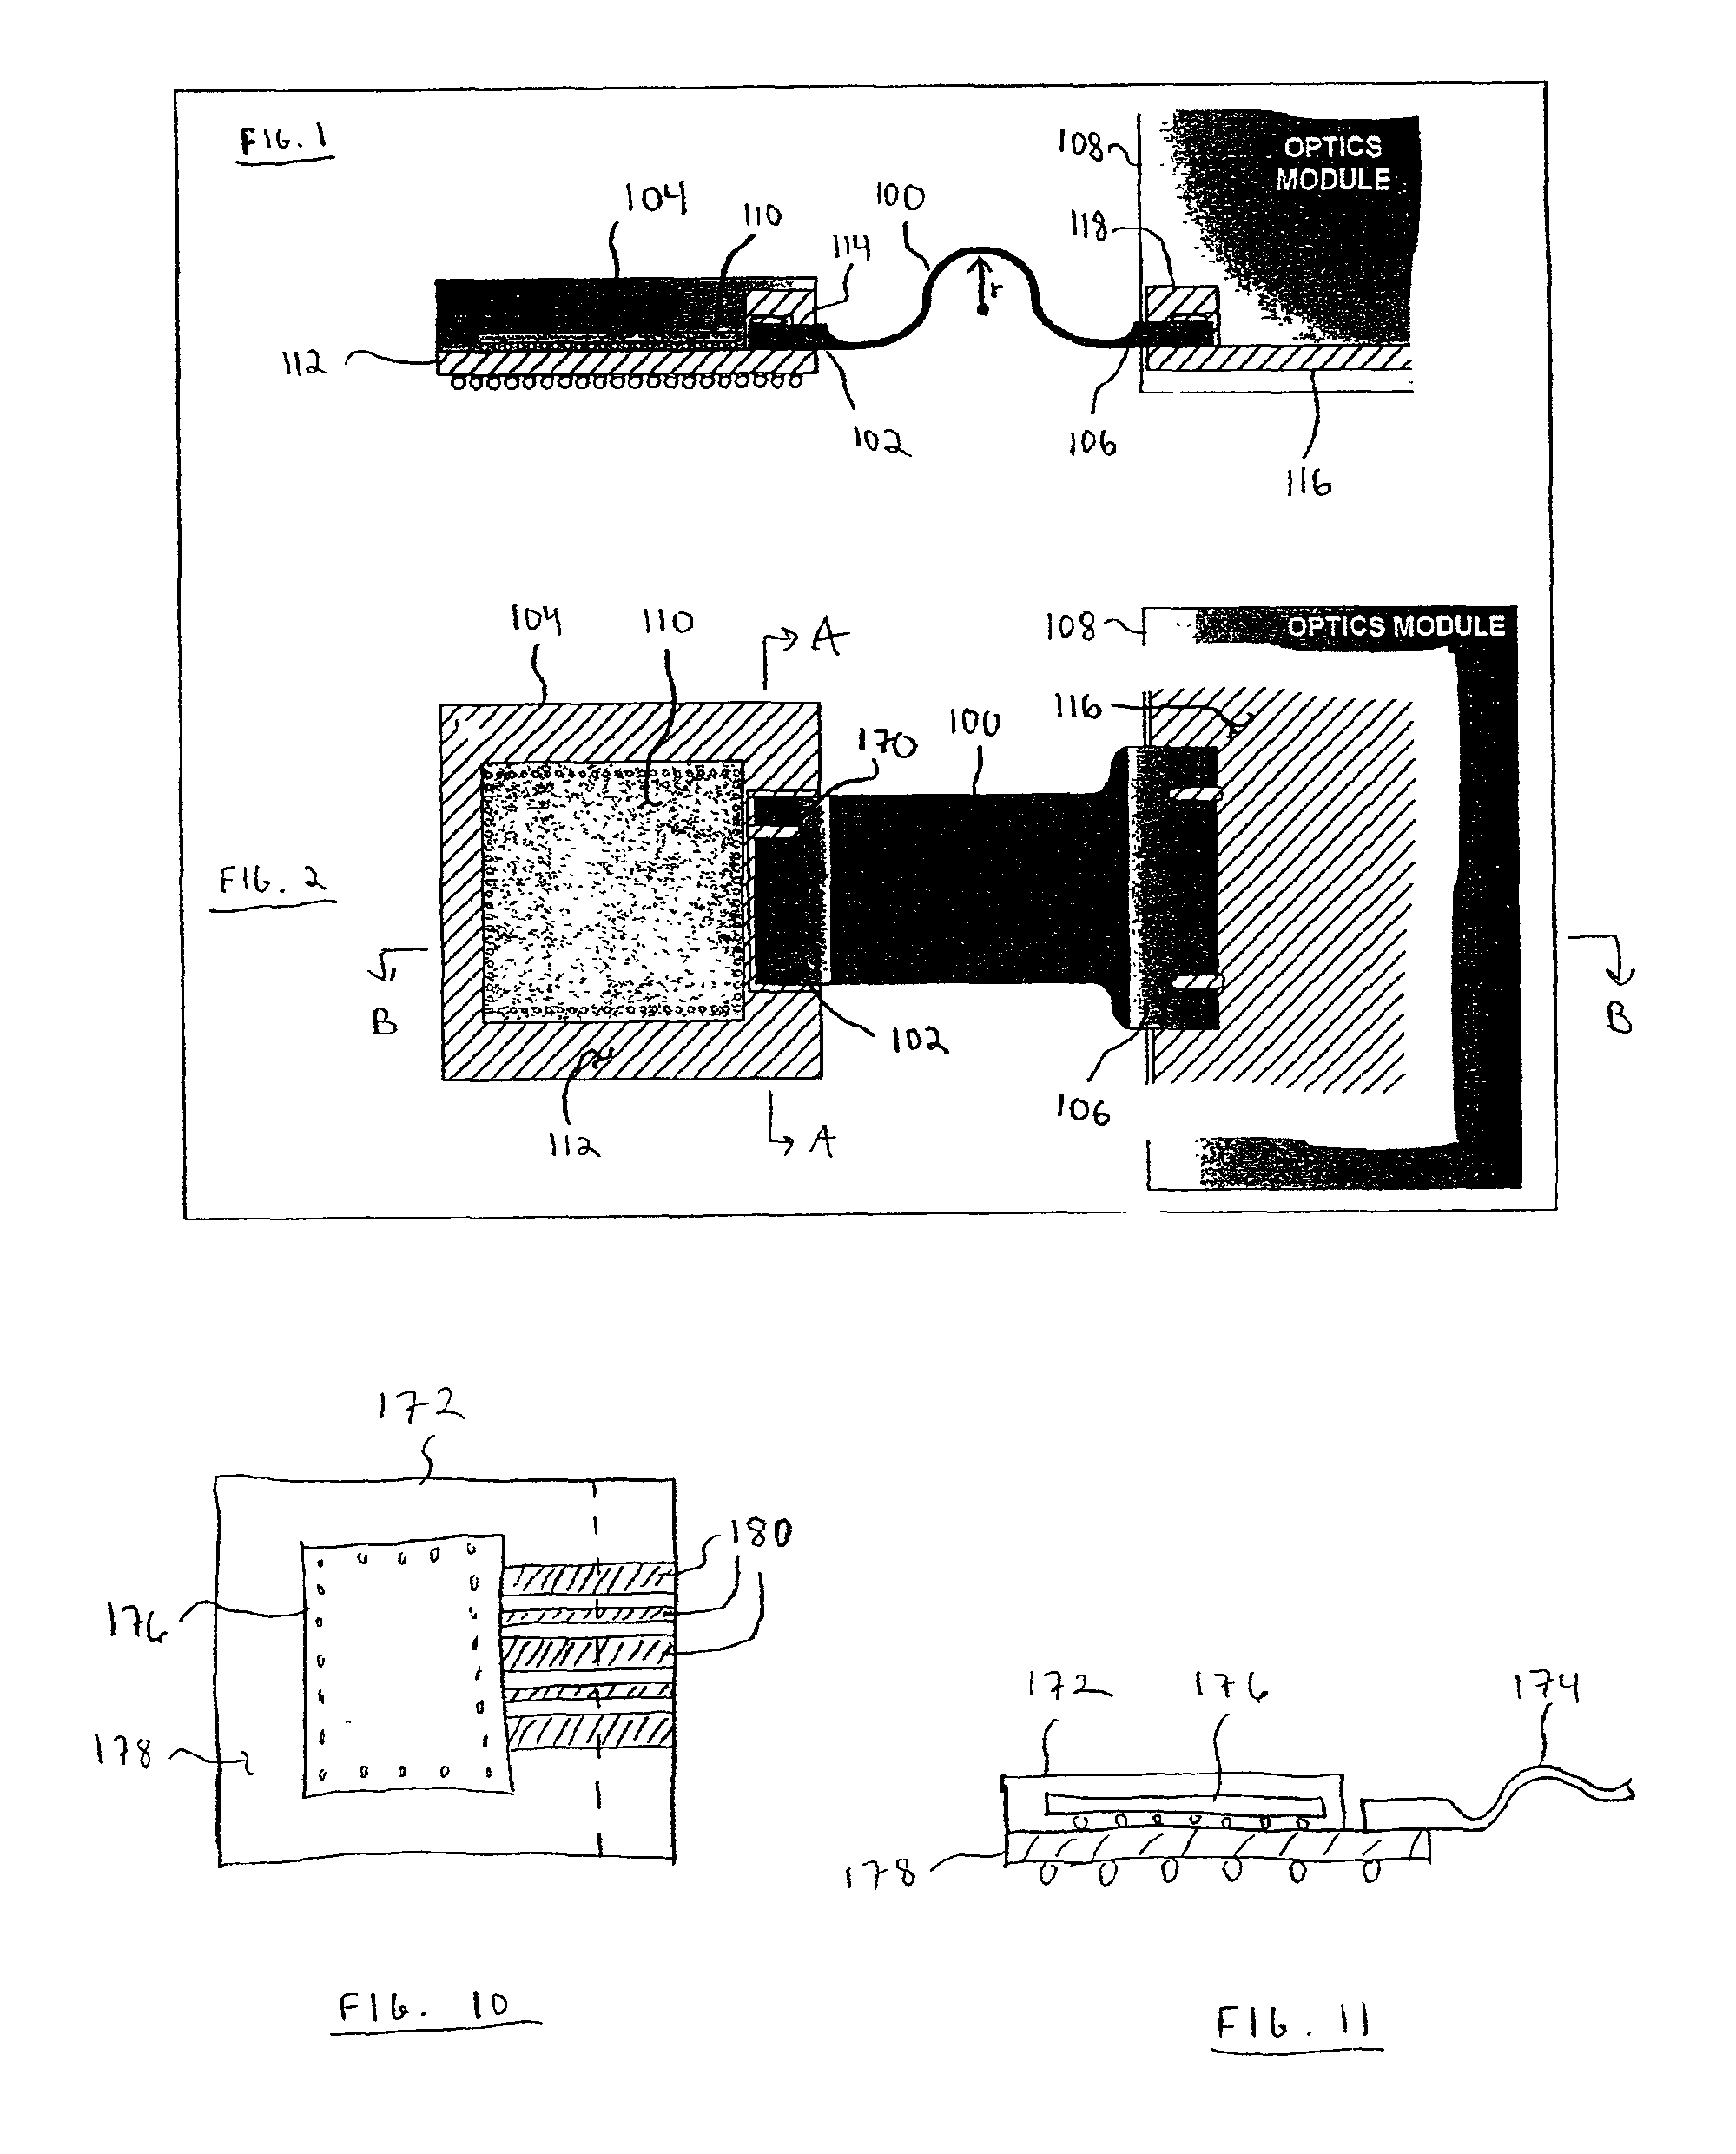 High frequency signal transmission from the surface of a circuit substrate to a flexible interconnect cable